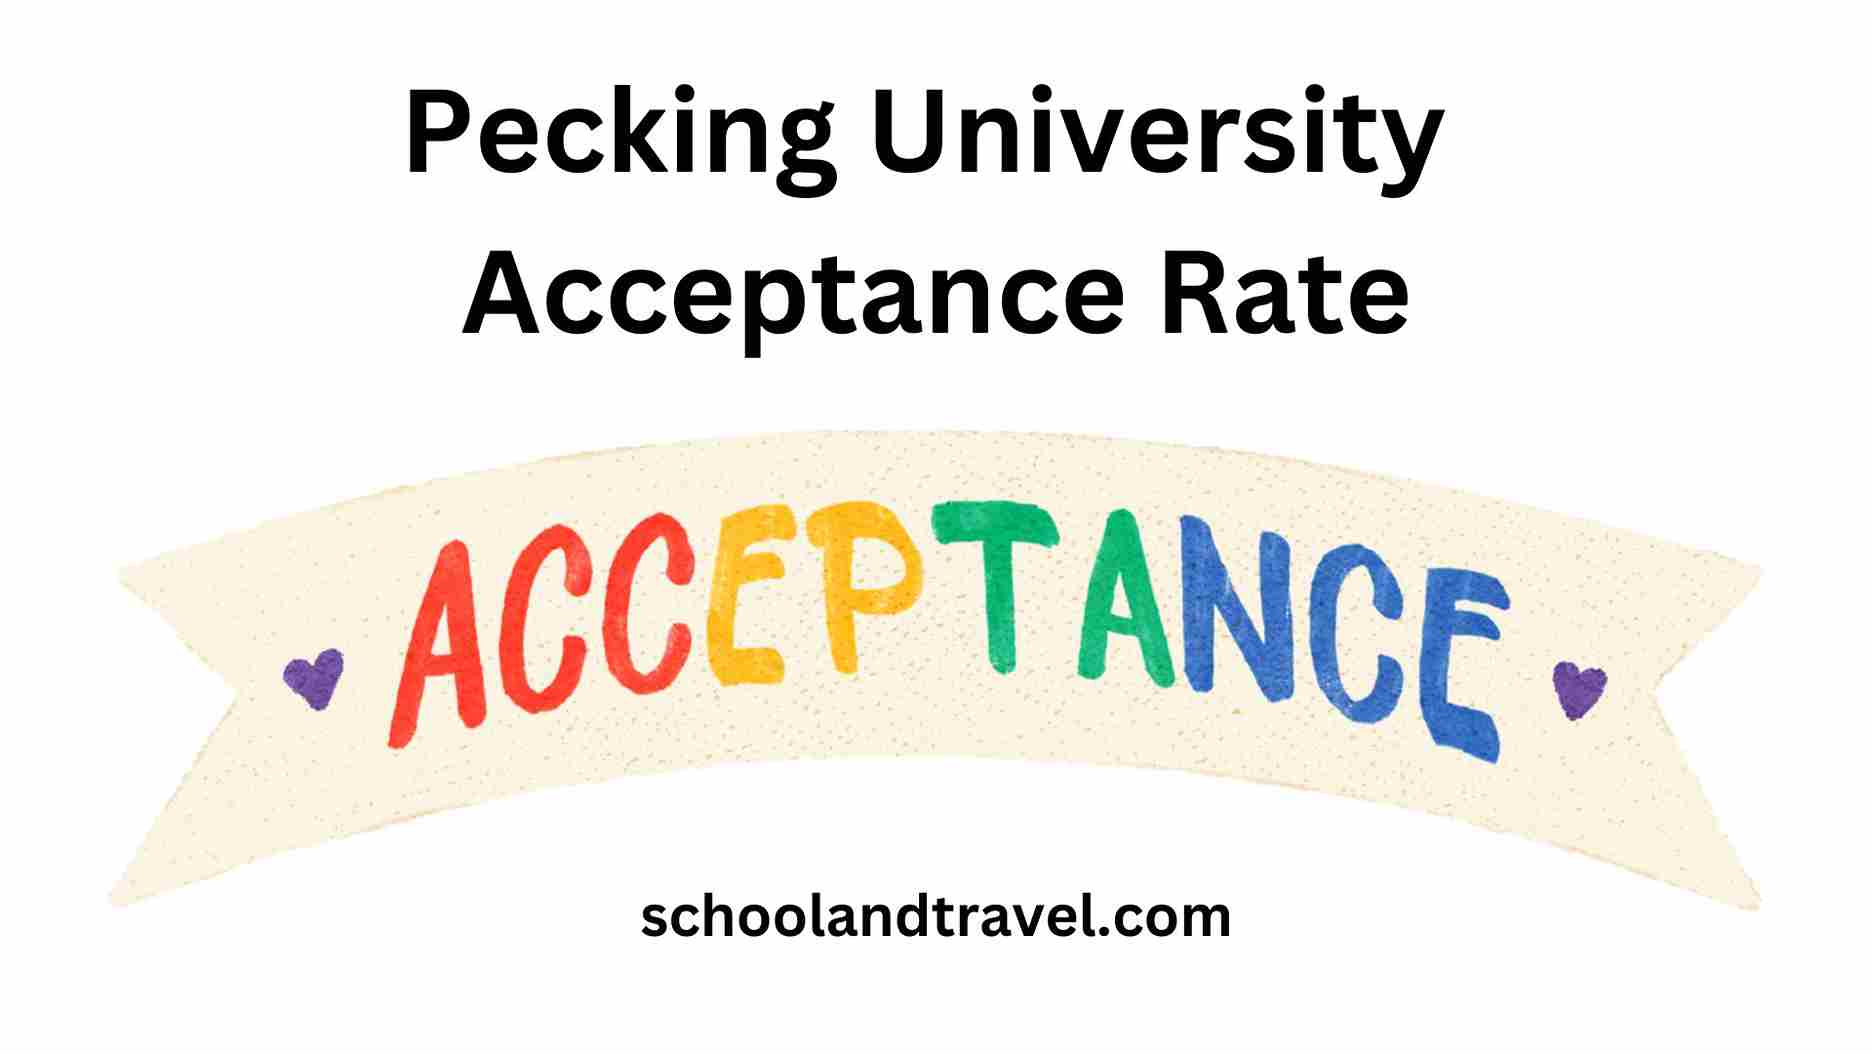 Pecking University Acceptance Rate